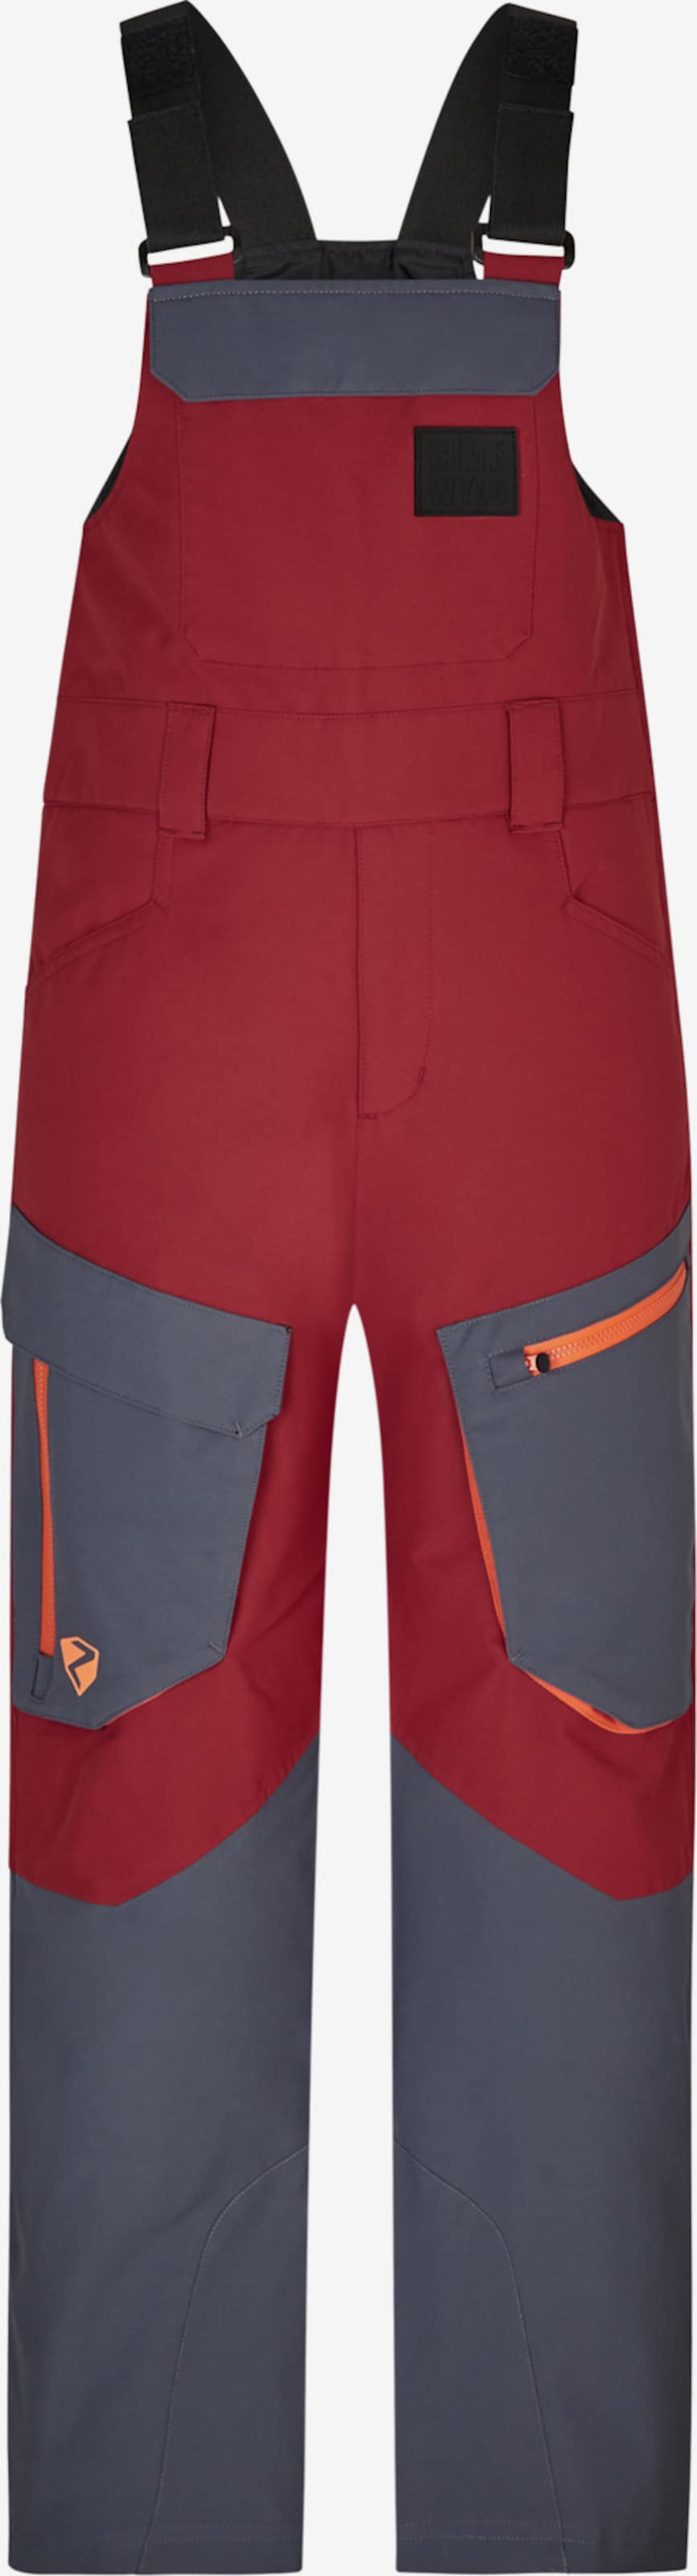 ZIENER Regular Workout Pants 'AKANDO-BIB' in Grey, Red | ABOUT YOU